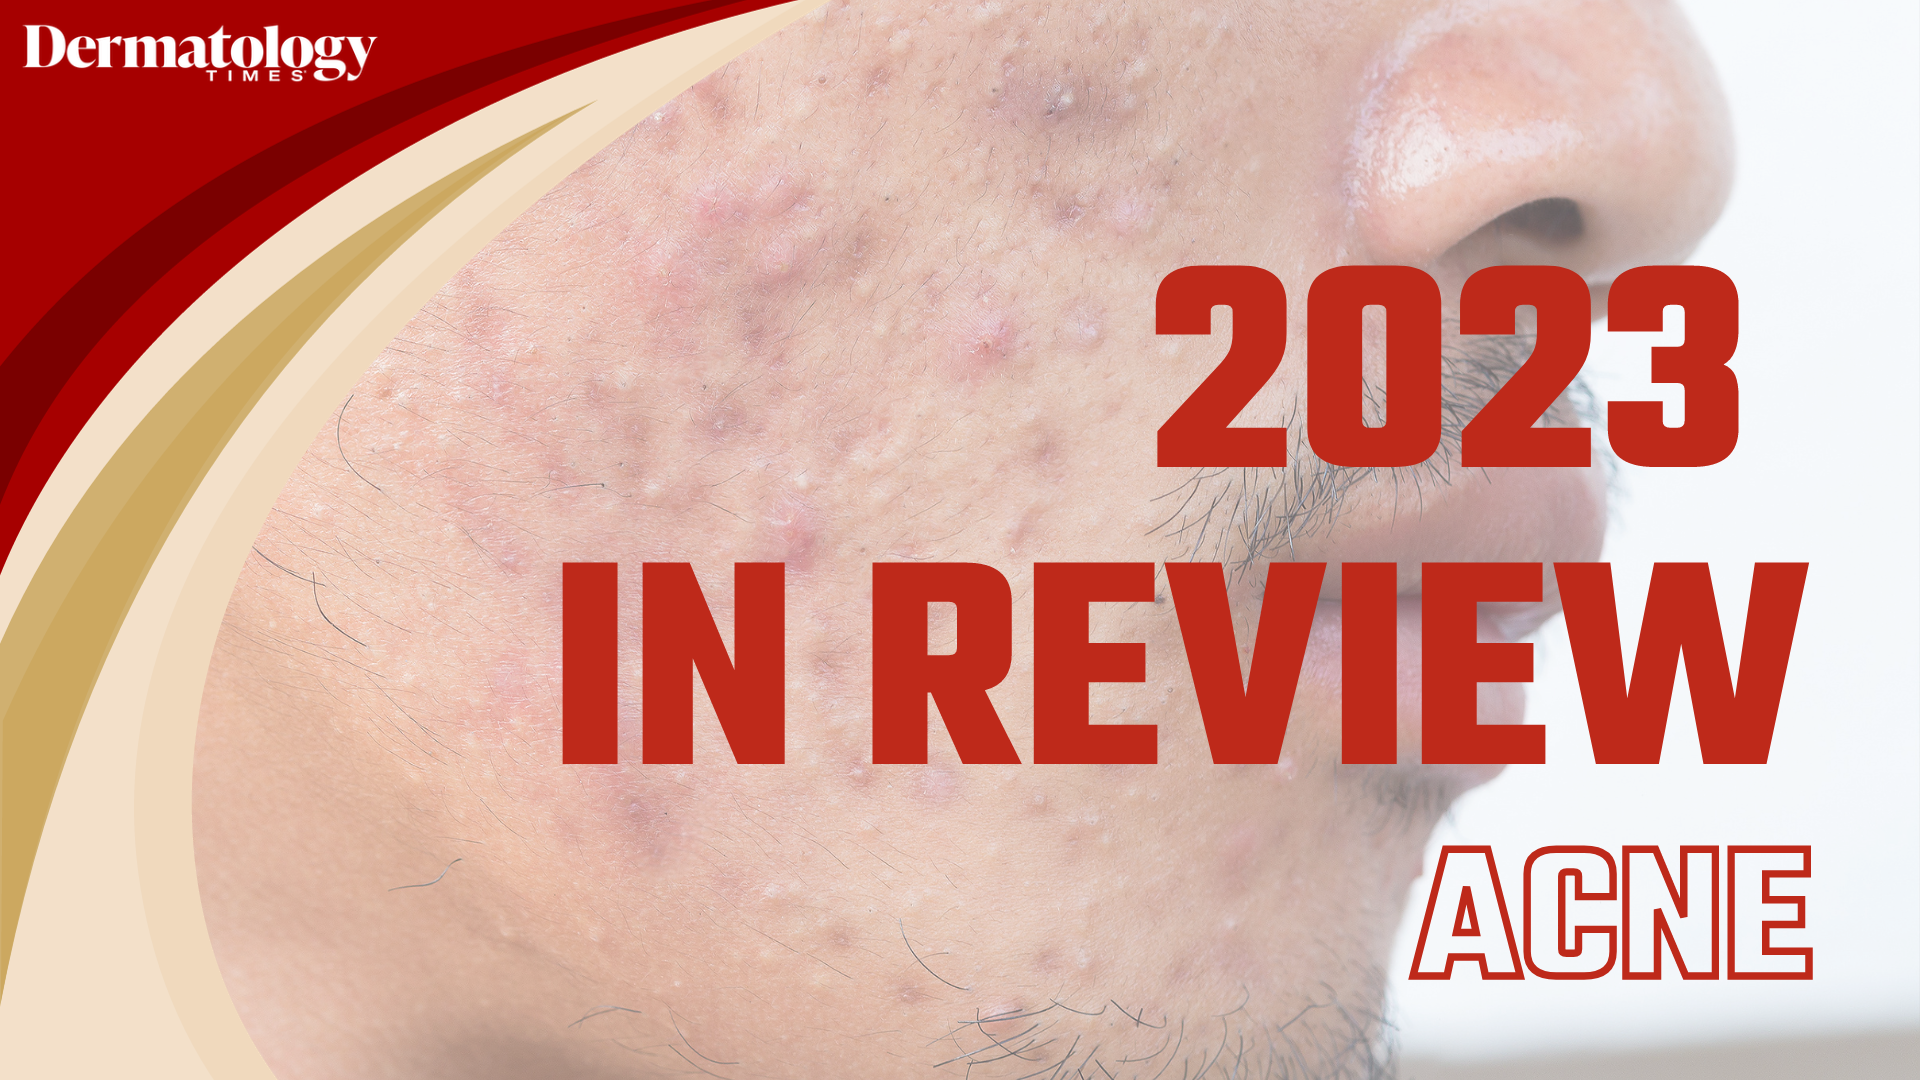 Dermatology Times 2023 In Review: Acne